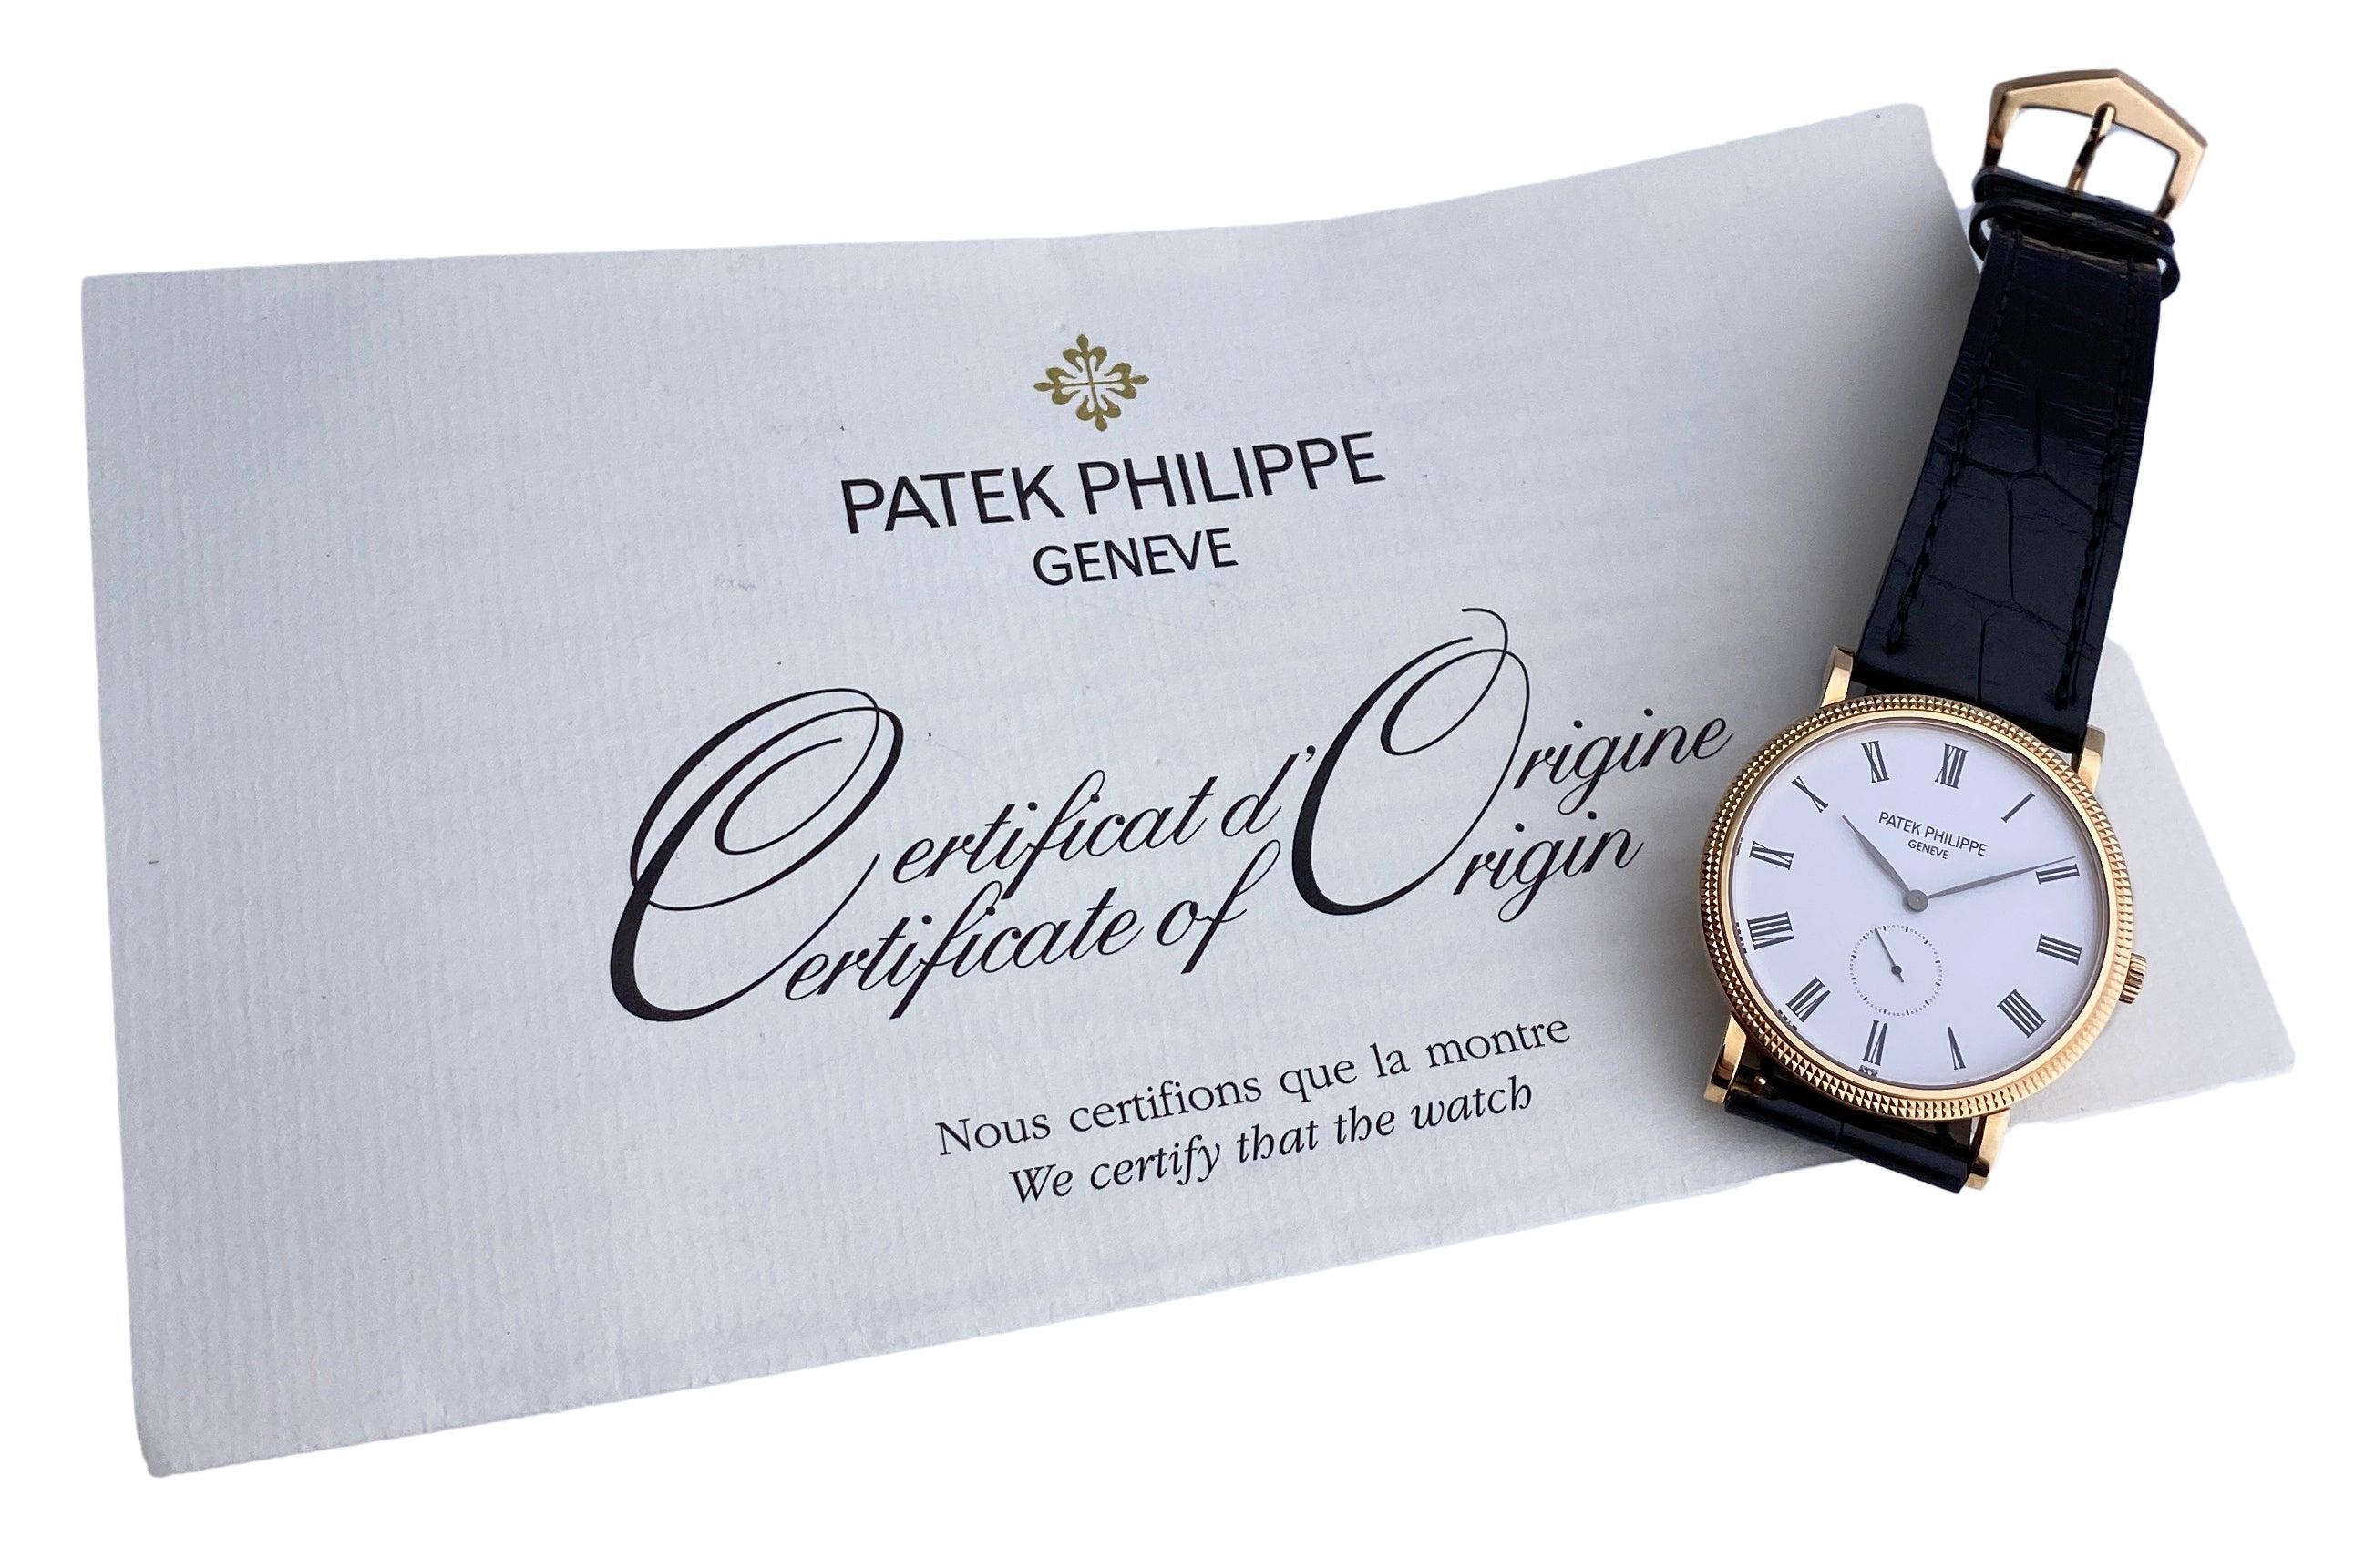 Patek Philippe Calatrava 5119R Mens Watch. 36mm 18K rose gold case with Hobnail patterned bezel. White dial with black steel hands and Roman numeral hour markers. Small second sub-dial. Black alligator leather strap with 18K rose gold buckle.Will